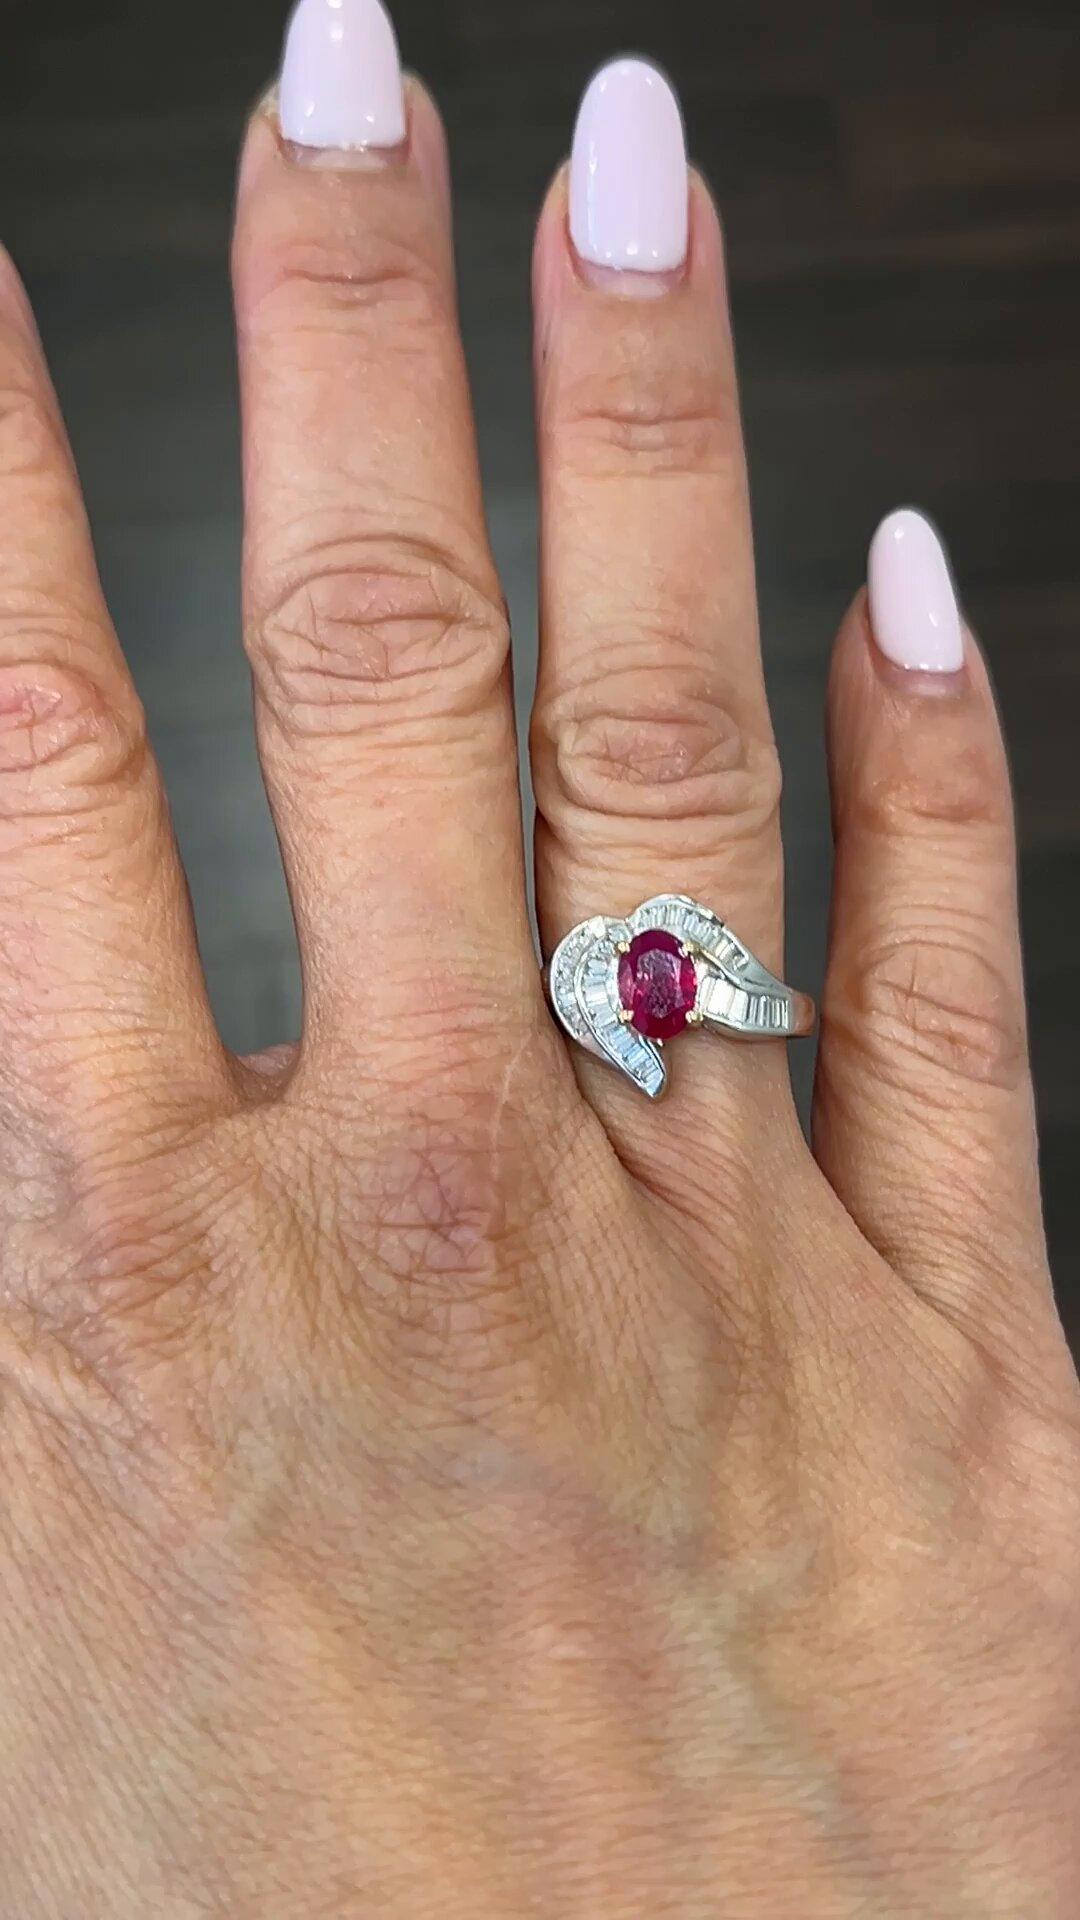 Elevate your style with this stunning ring featuring a vibrant red oval-shaped ruby gemstone weighing 0.98 carats. The eye-catching gemstone is surrounded by sparkling diamonds, adding to the glamour of this piece. Crafted in 18k white gold, this